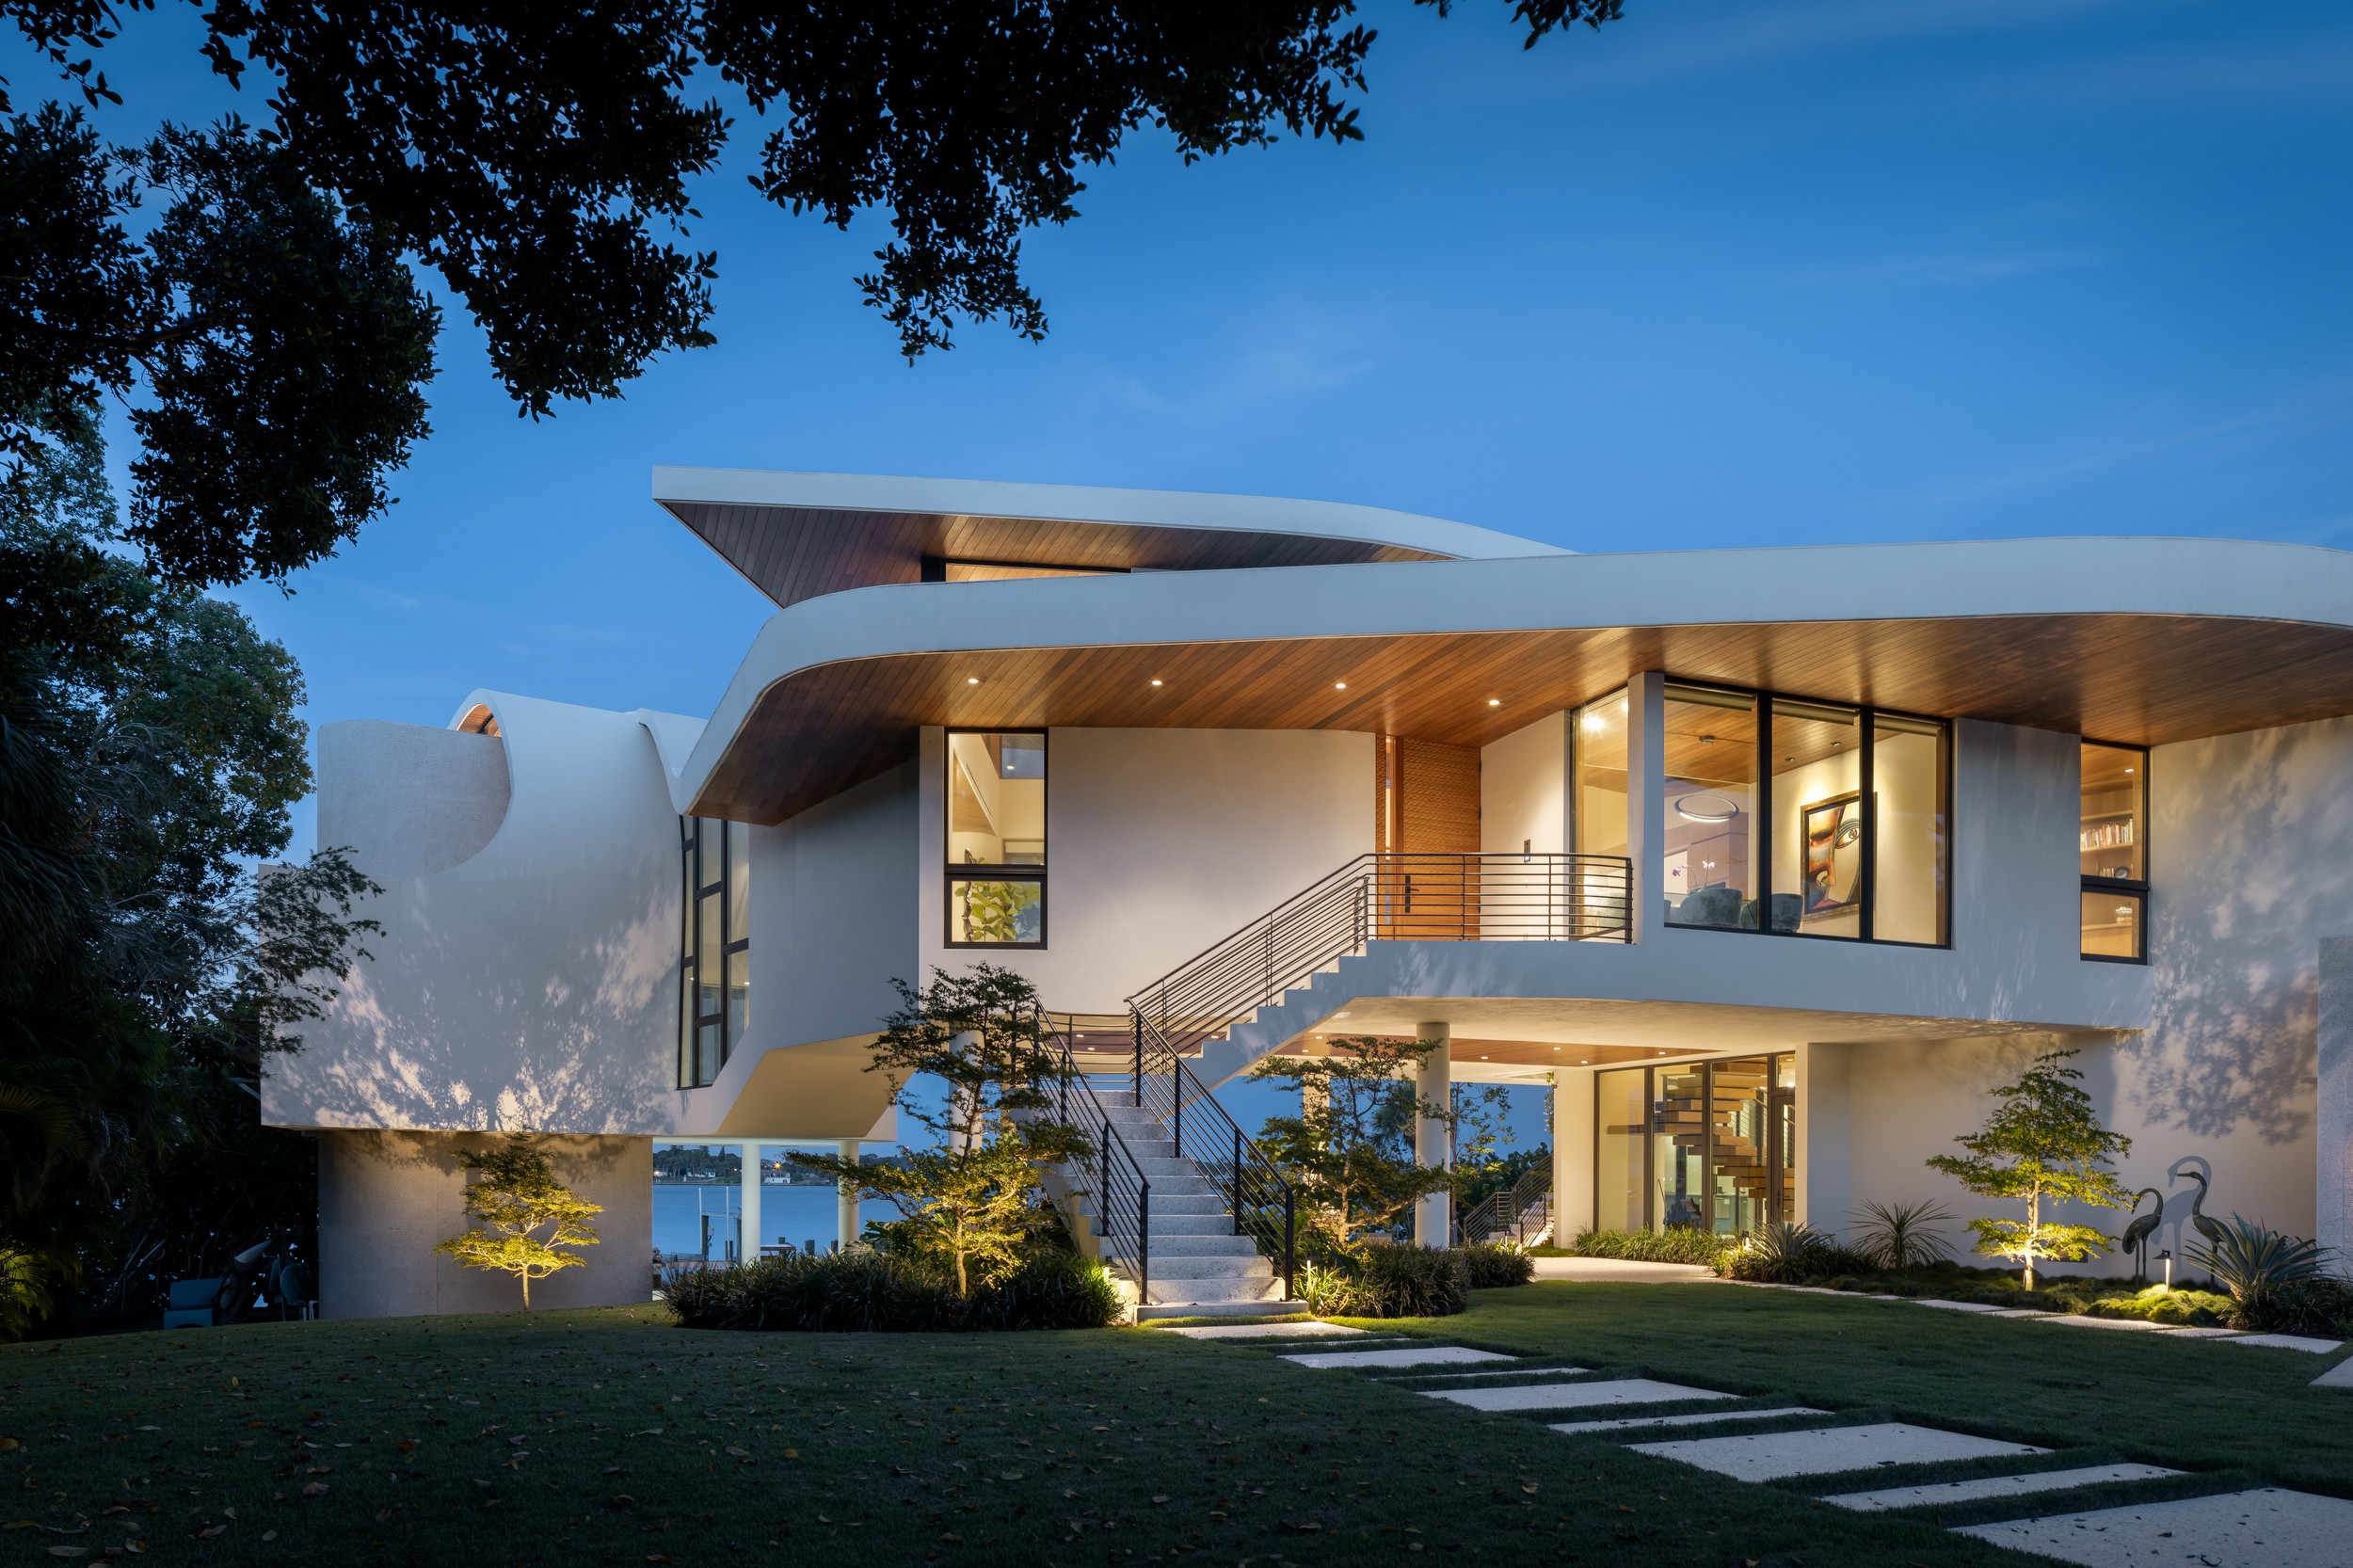 Möbius was designed with intention of breaking away from architectural norms, including repeating right angles, and standard roof designs and connections. Nestled into a serene landscape on the barrie